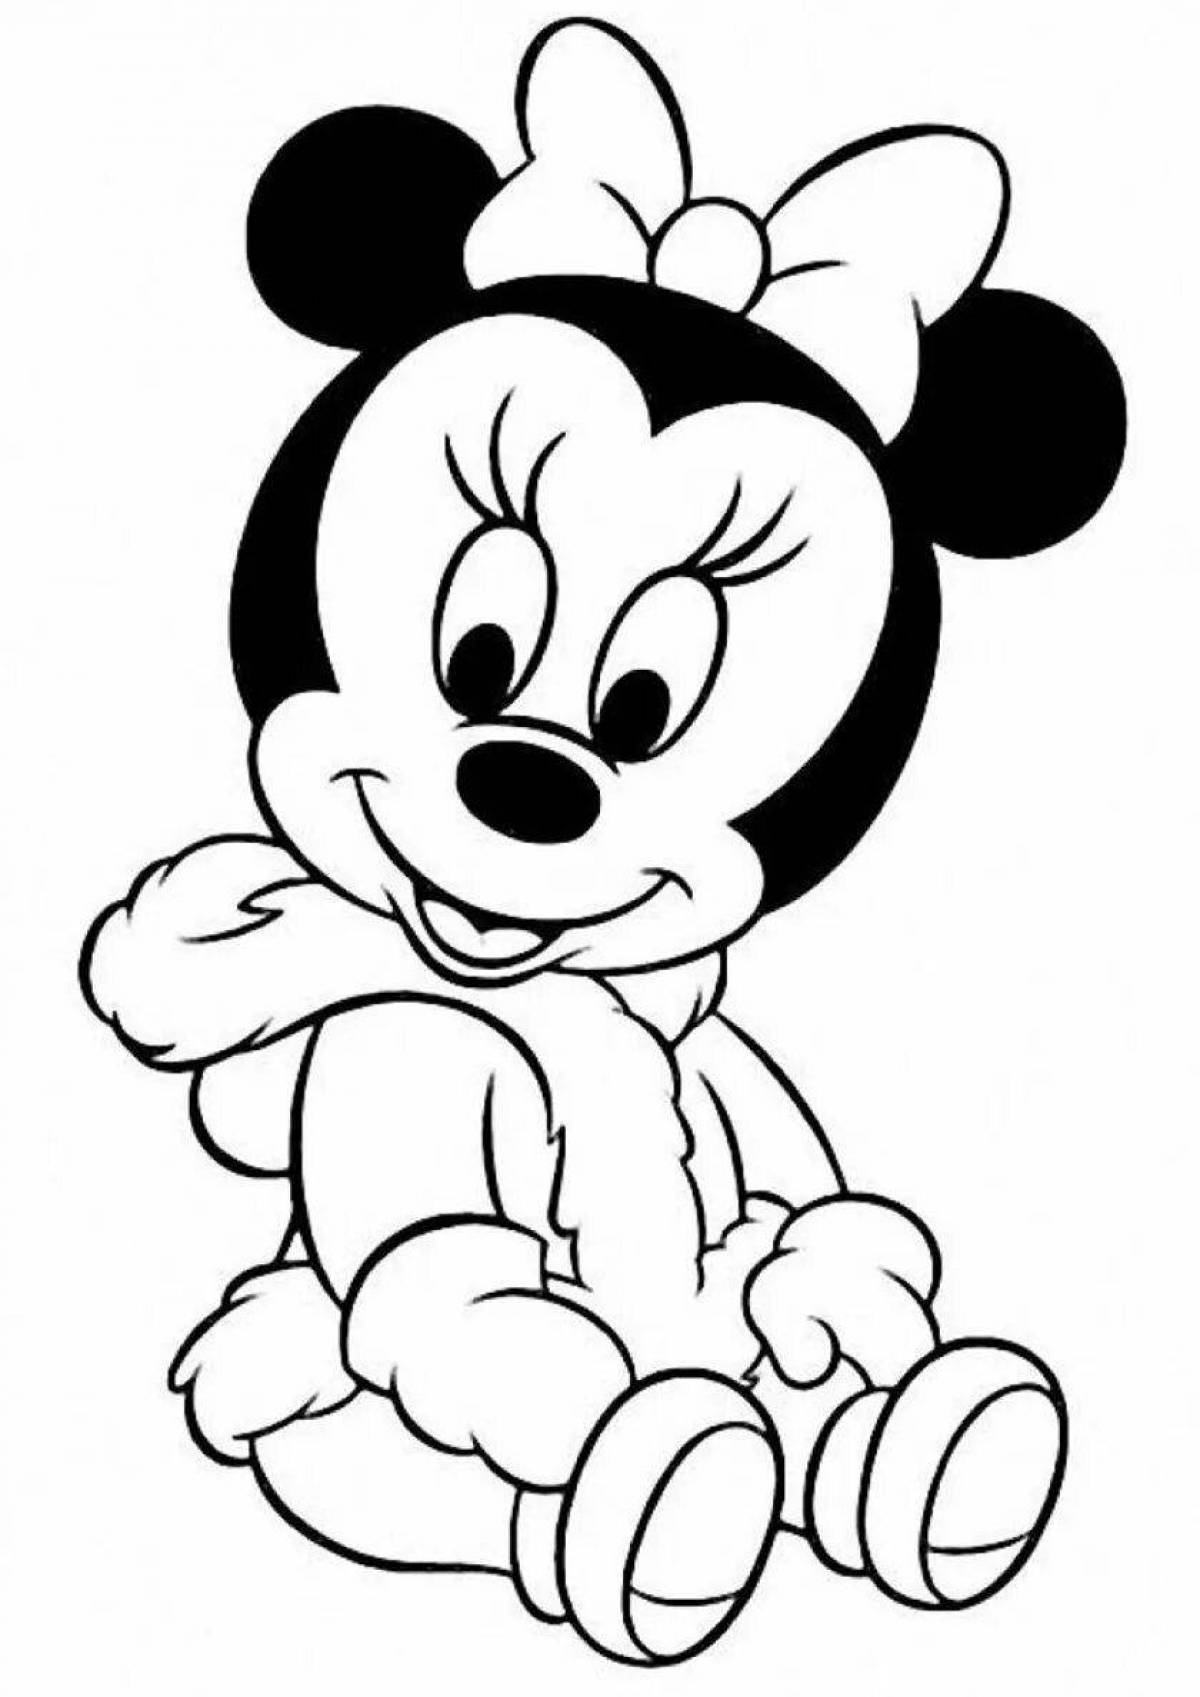 Coloring shining minnie